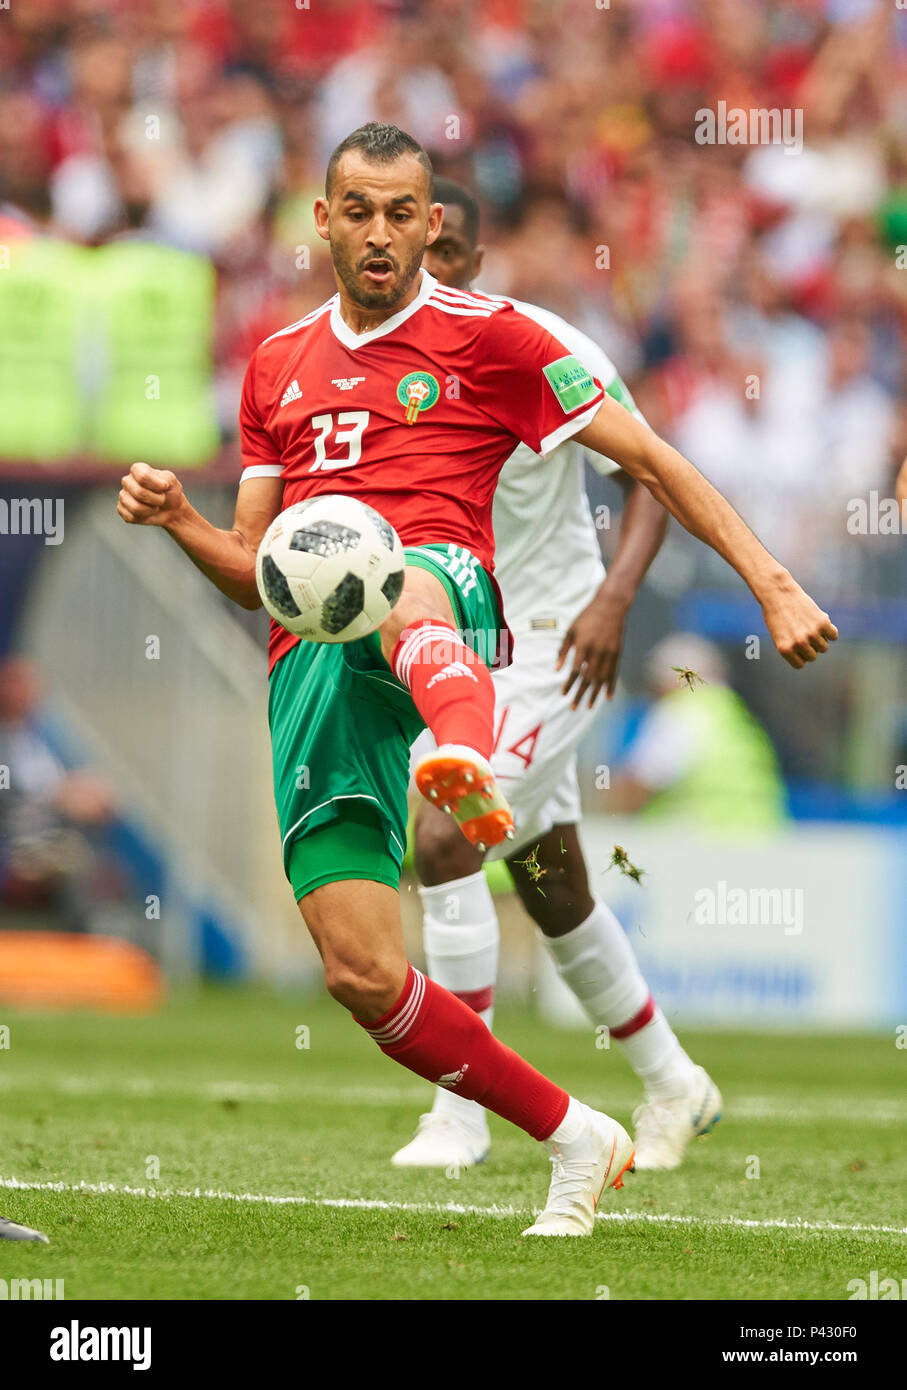 Moscow, Russia. 20th June, 2018. Portugal - Morocco, Soccer, Moscow, June 20, 2018 Mehdi CARCELA, Morocco Nr.23  compete for the ball, tackling, duel, header against William CARVALHO, Por 14  PORTUGAL - MOROCCO 1-0 FIFA WORLD CUP 2018 RUSSIA, Group stage , Season 2018/2019,  June 20, 2018 L u z h n i k i Stadium in Moscow, Russia.  © Peter Schatz / Alamy Live News Credit: Peter Schatz/Alamy Live News Stock Photo